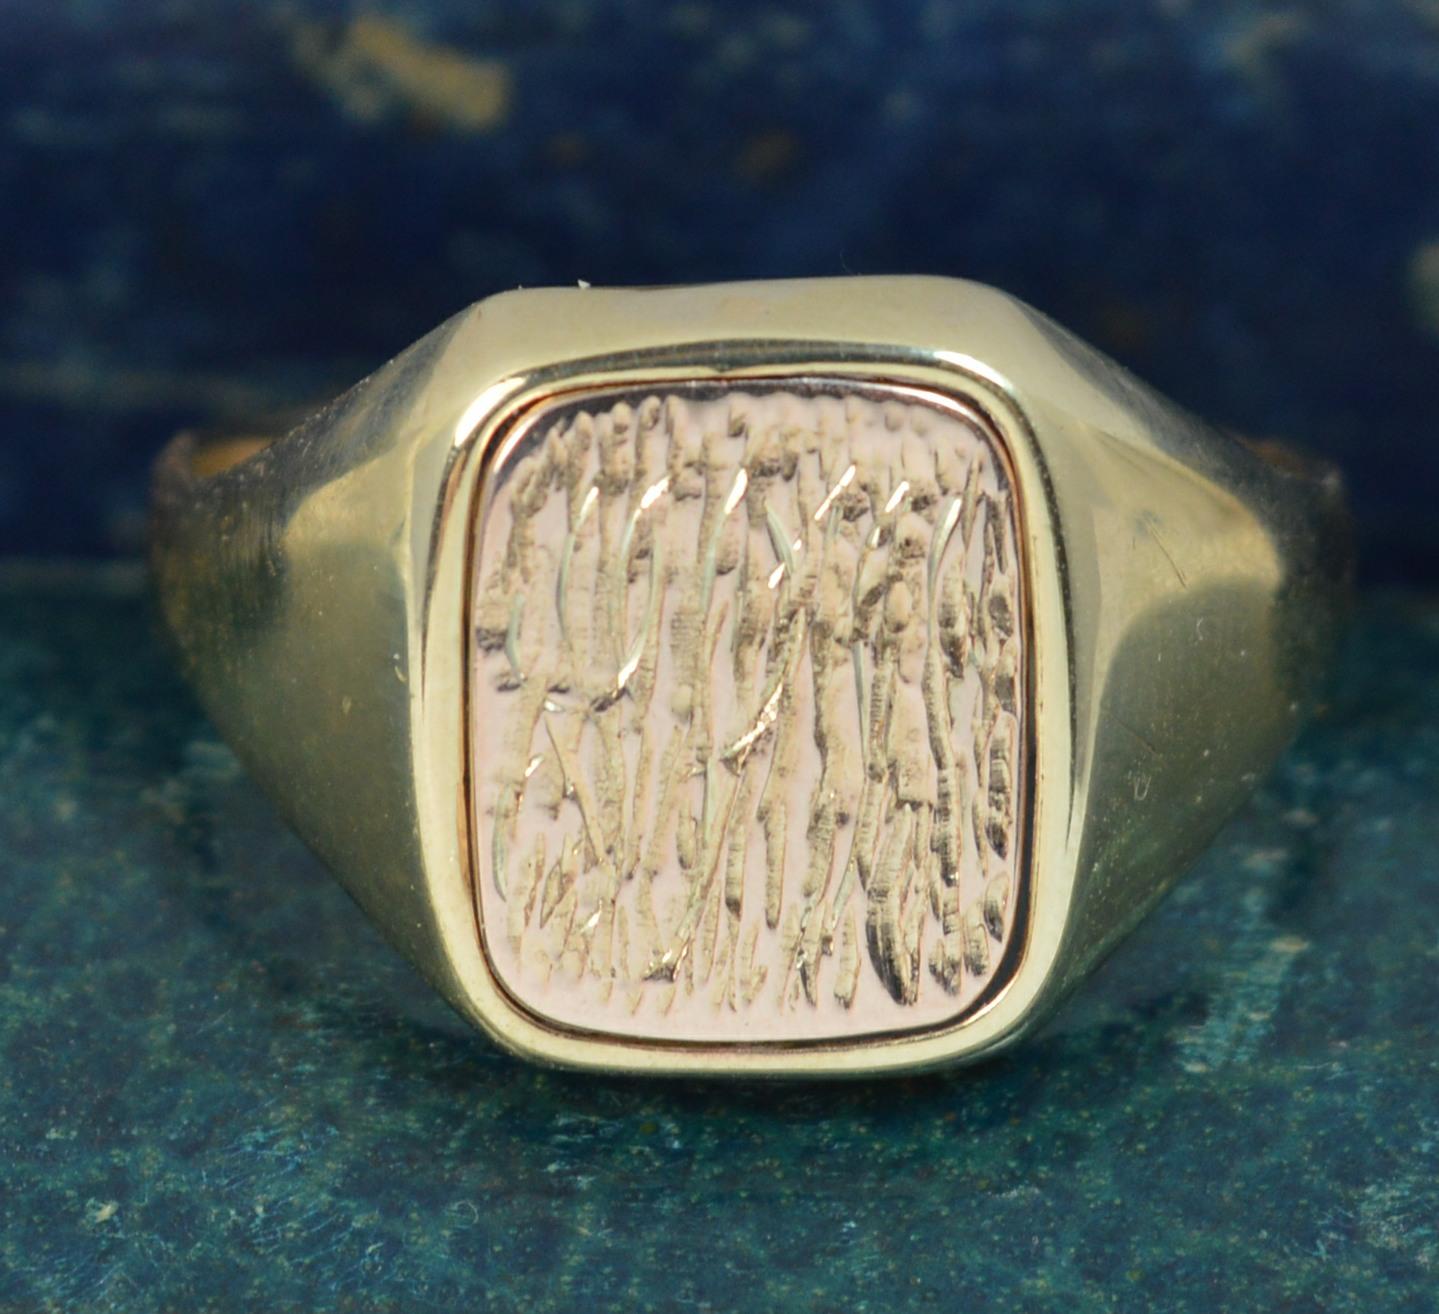 A mens Masonic signet ring. Solid 9 carat yellow gold band. Enamel swivel front to measure 9mm x 11mm approx with masons pattern one side and etched finish the other.
Size ; R 1/2 UK, 8 3/4 US

Condition ; Good for age. Clean band, polished. Secure